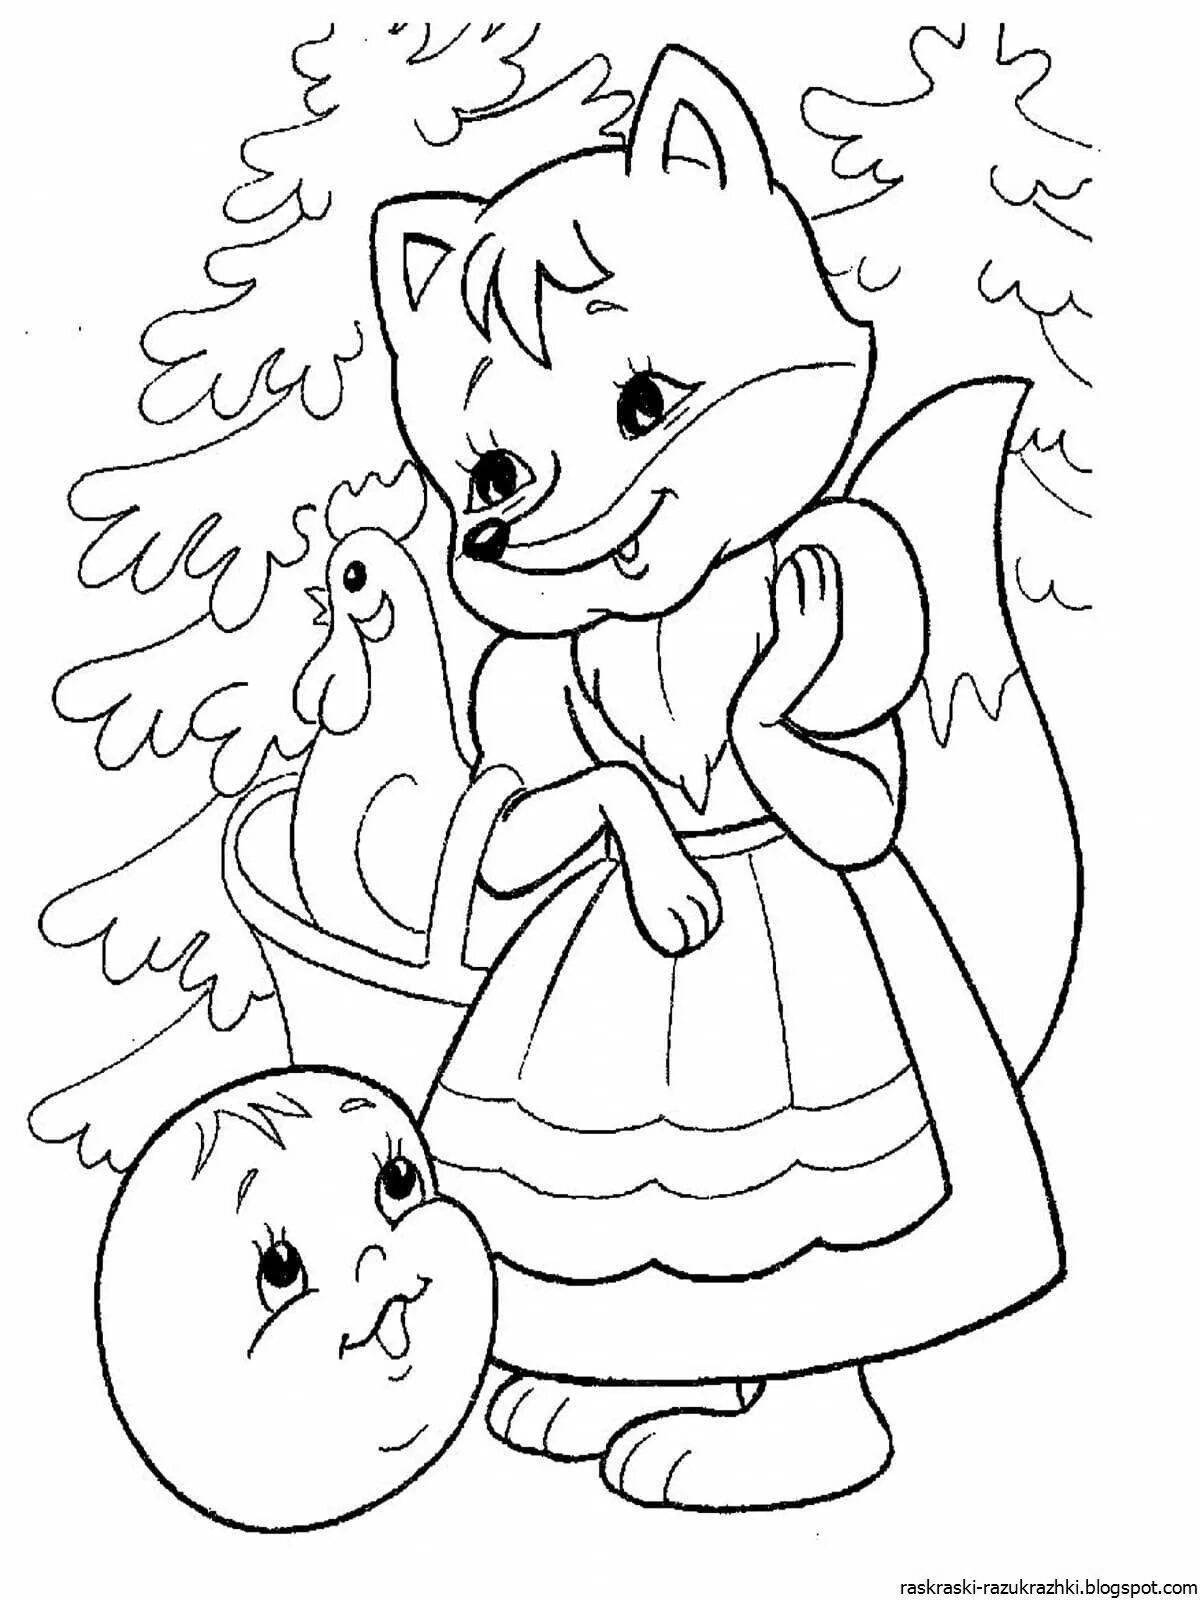 Shiny coloring book heroes of fairy tales